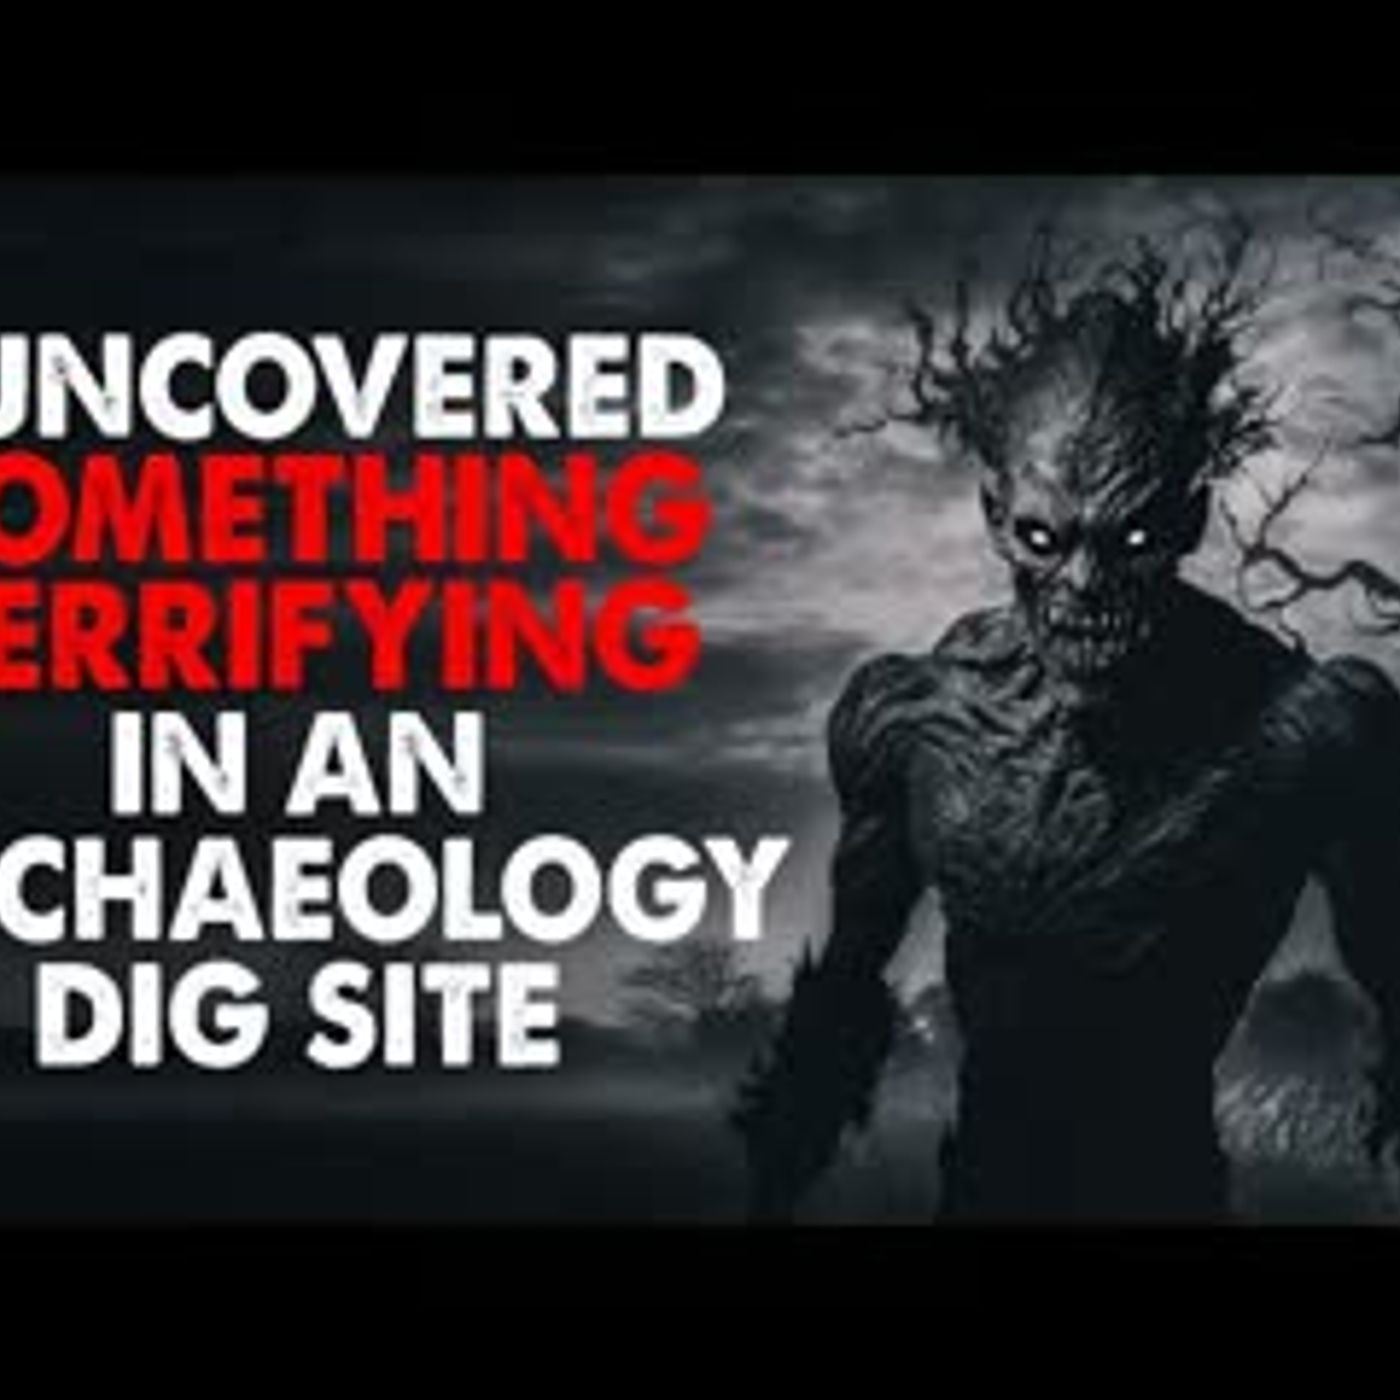 "I uncovered something terrifying in an archaeology dig site" Creepypasta